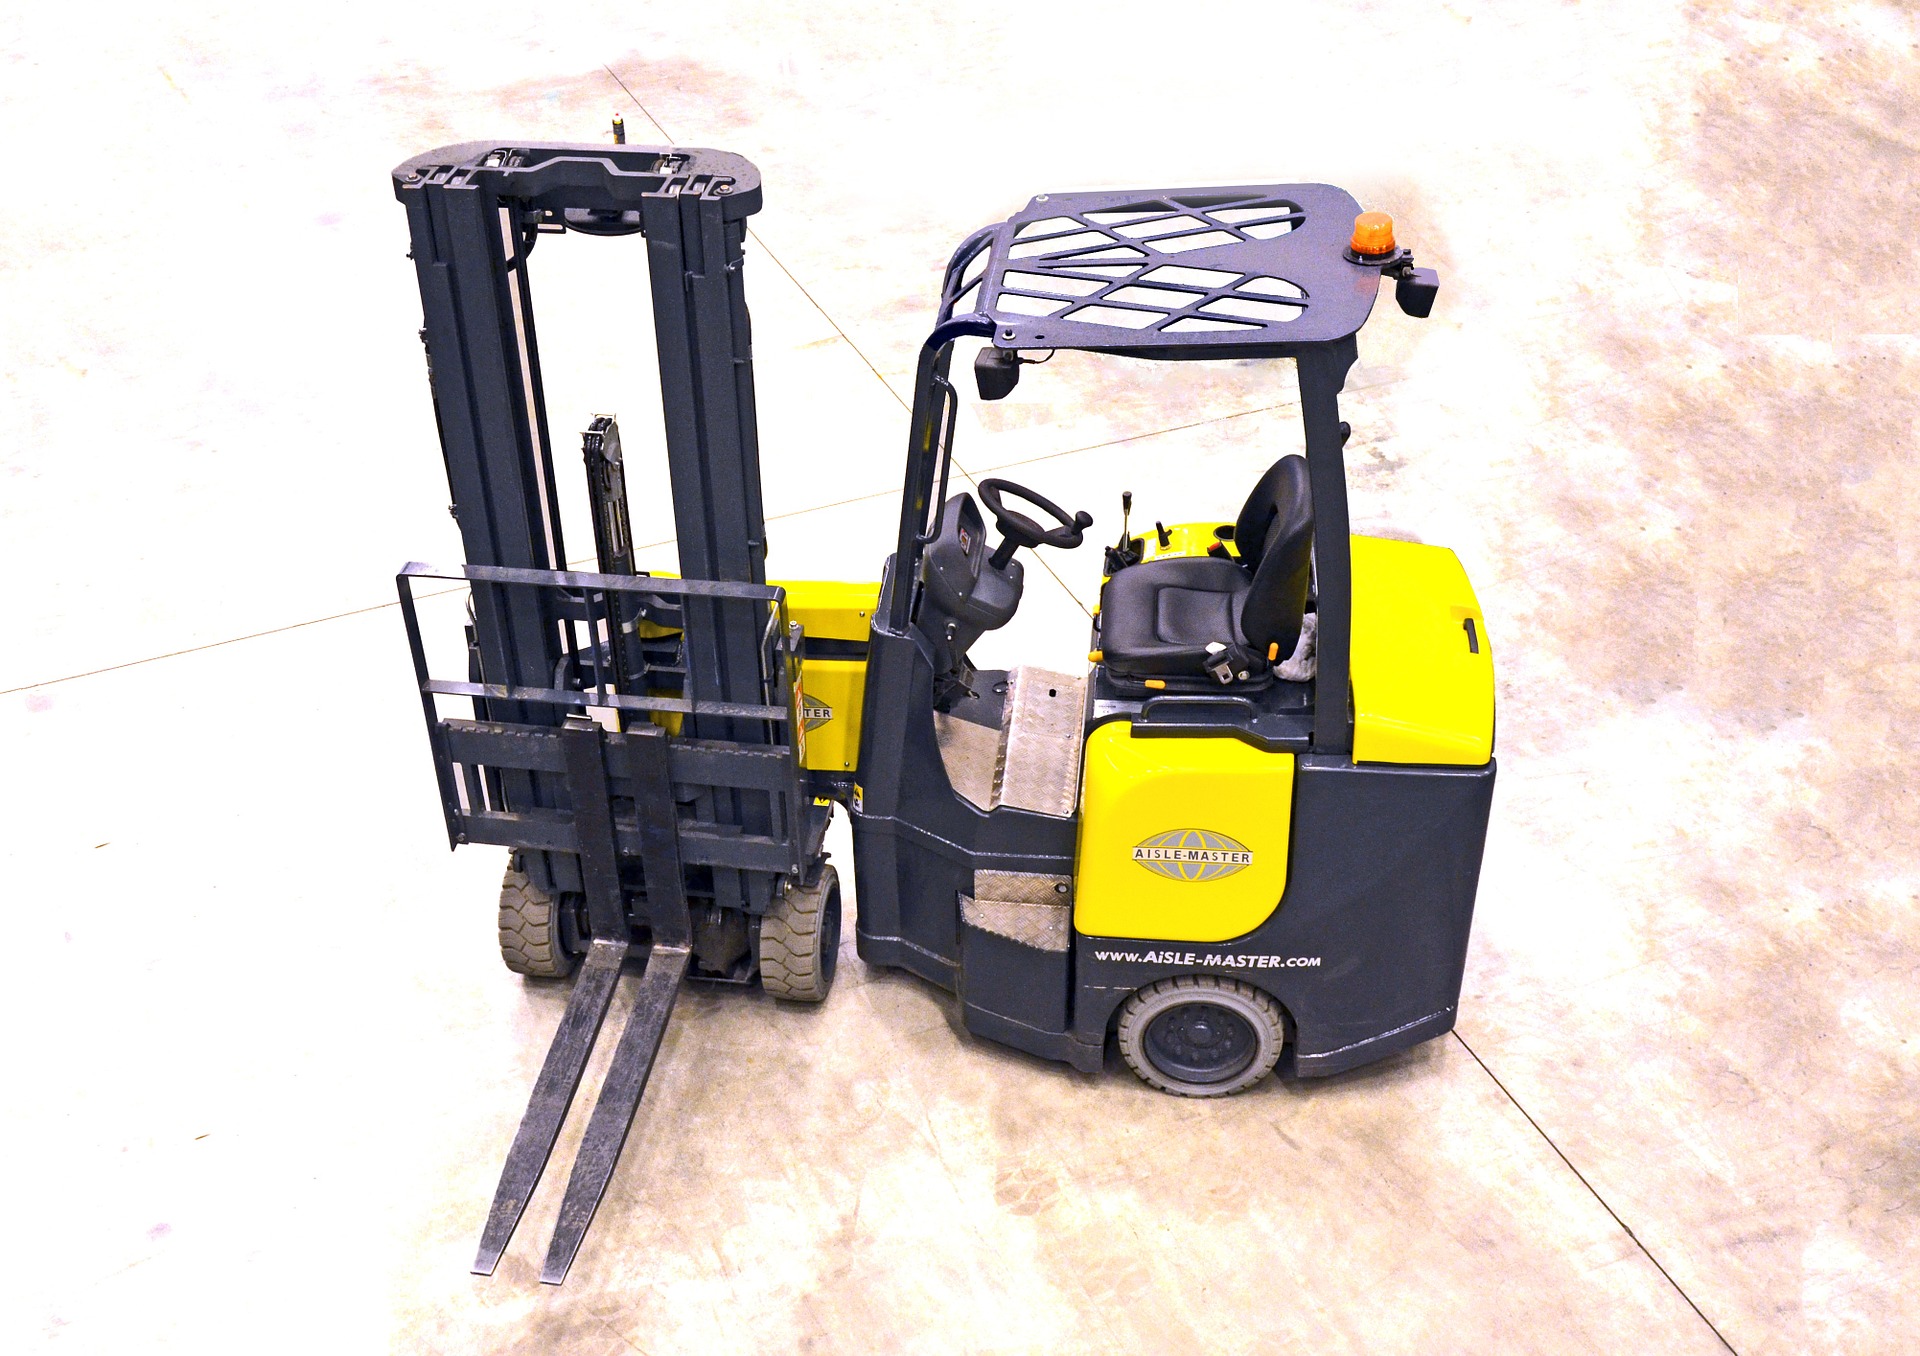 Pre-owned narrow aisle reach truck in a warehouse